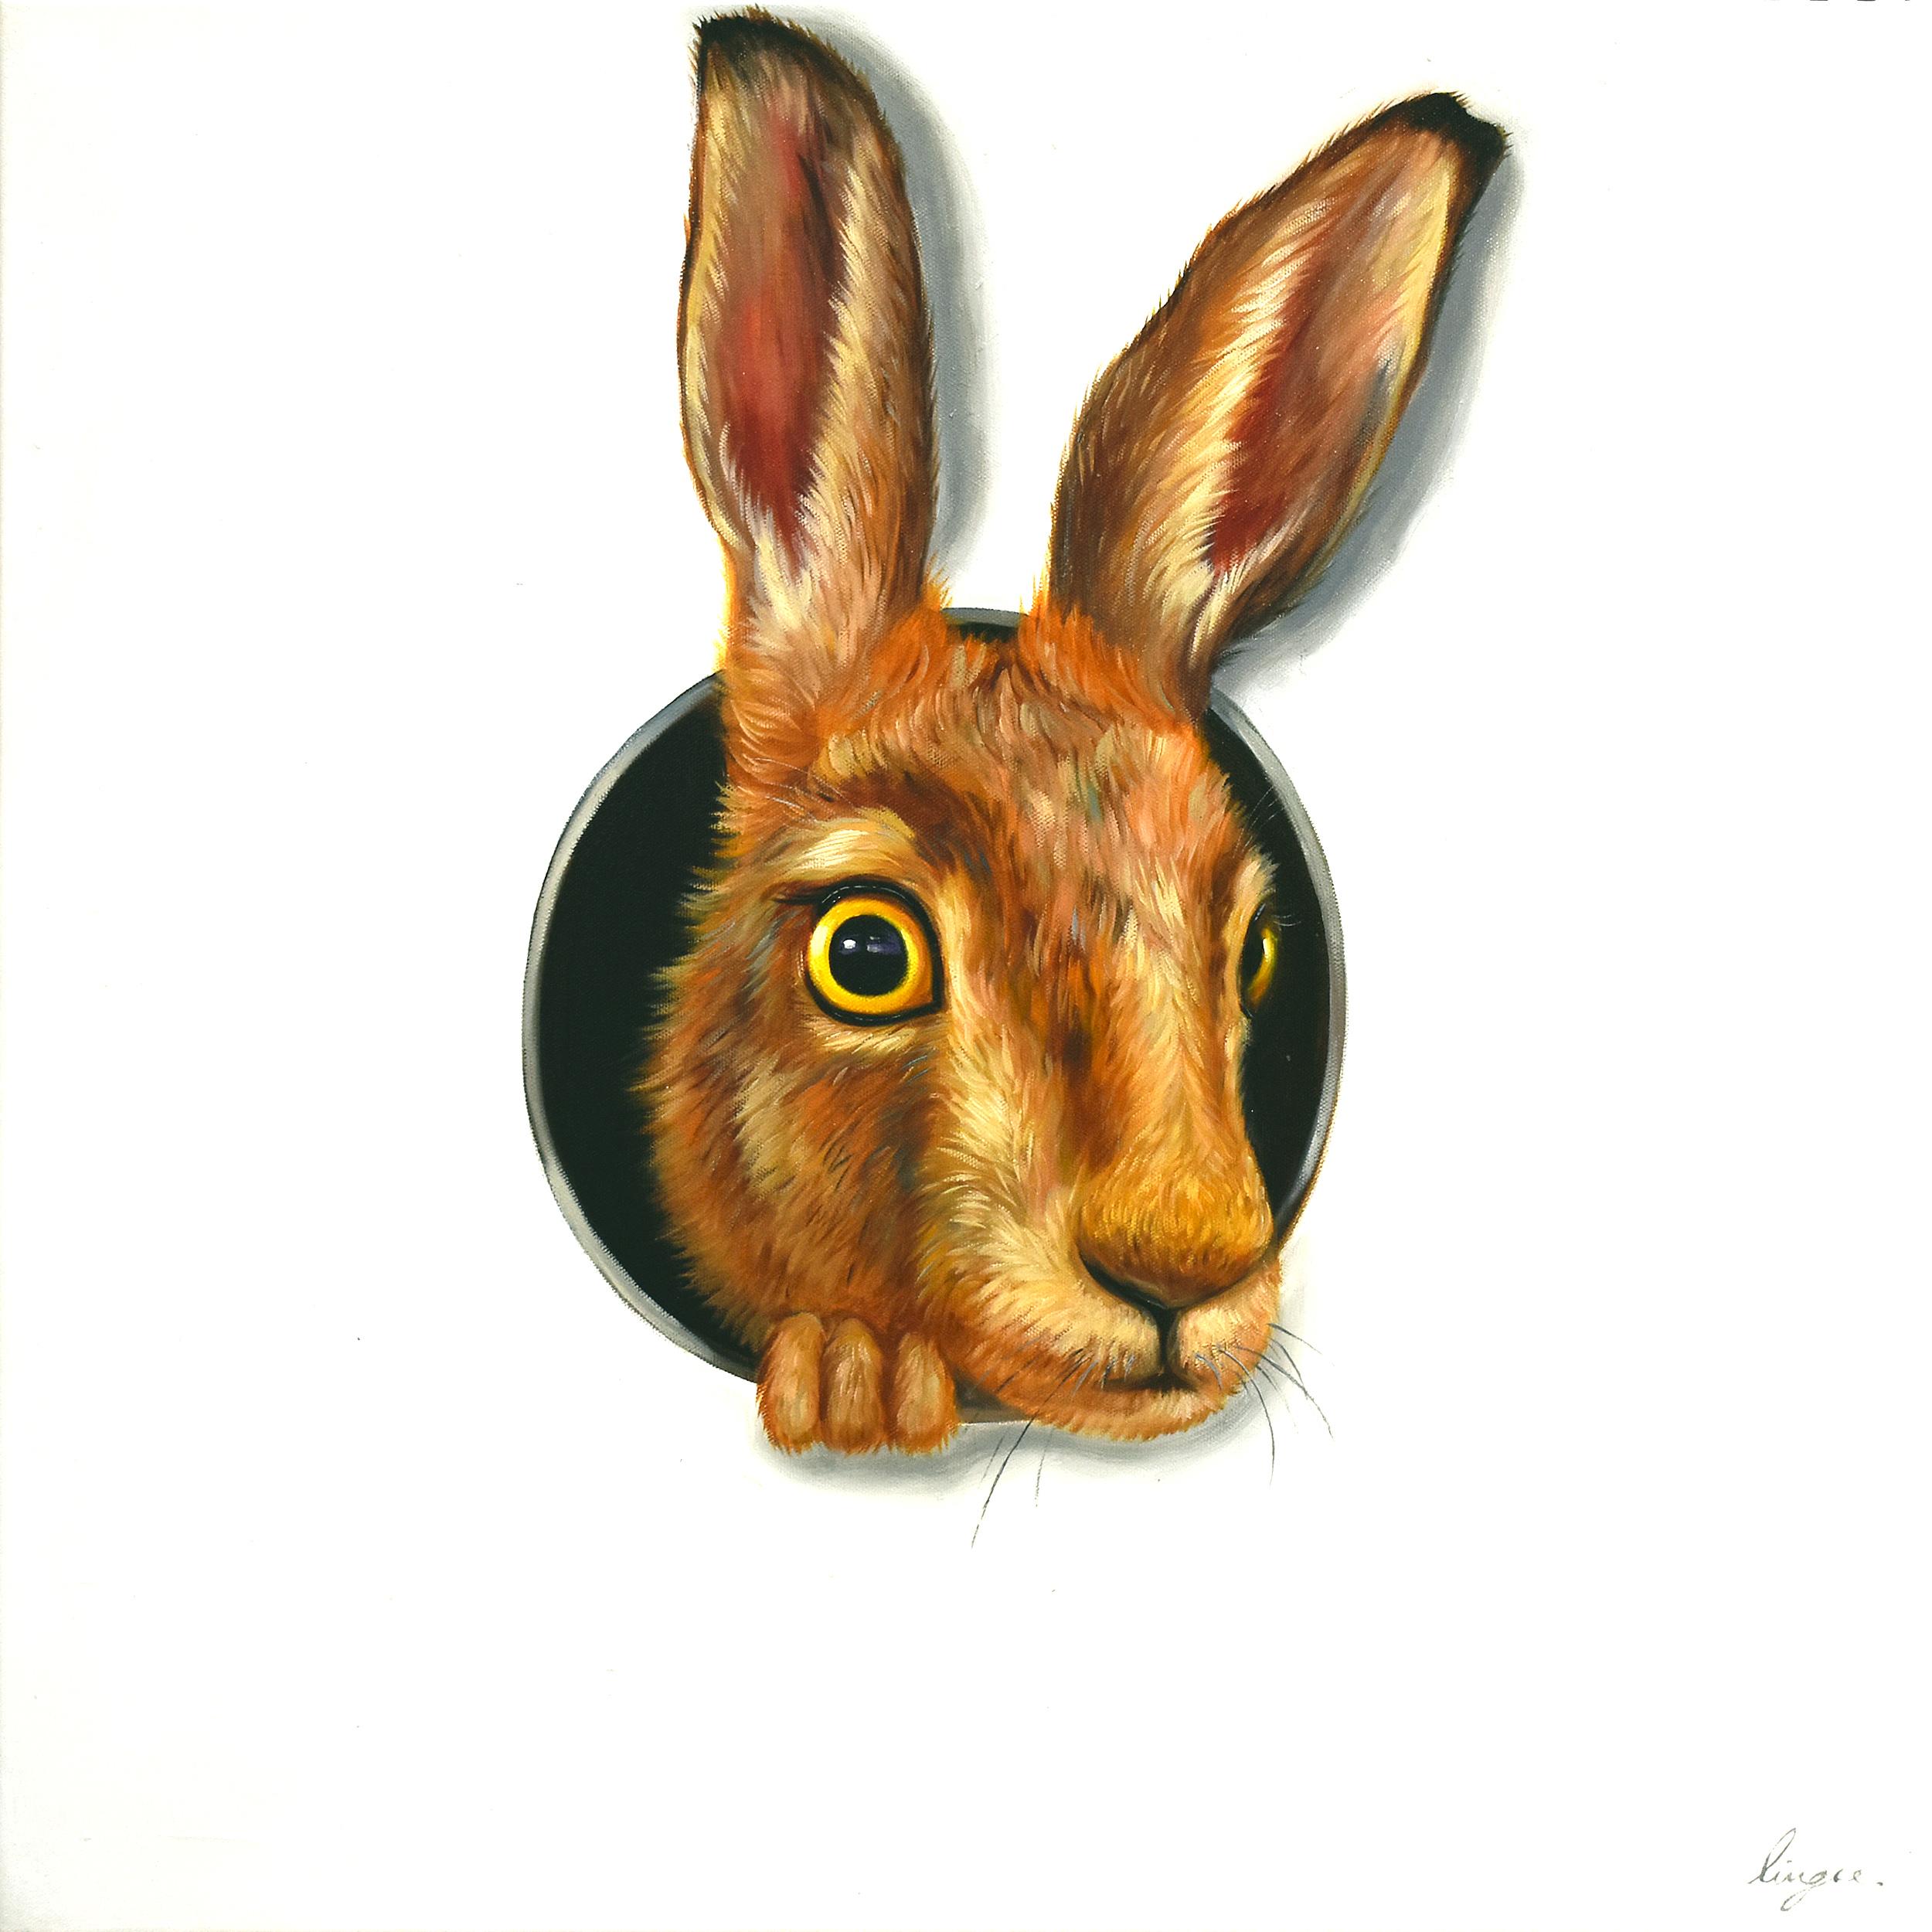 Lingee Bangkhuntod Animal Painting - Hare in Hole 1. Adorable Rabbit looking through a Hole. Oil Painting